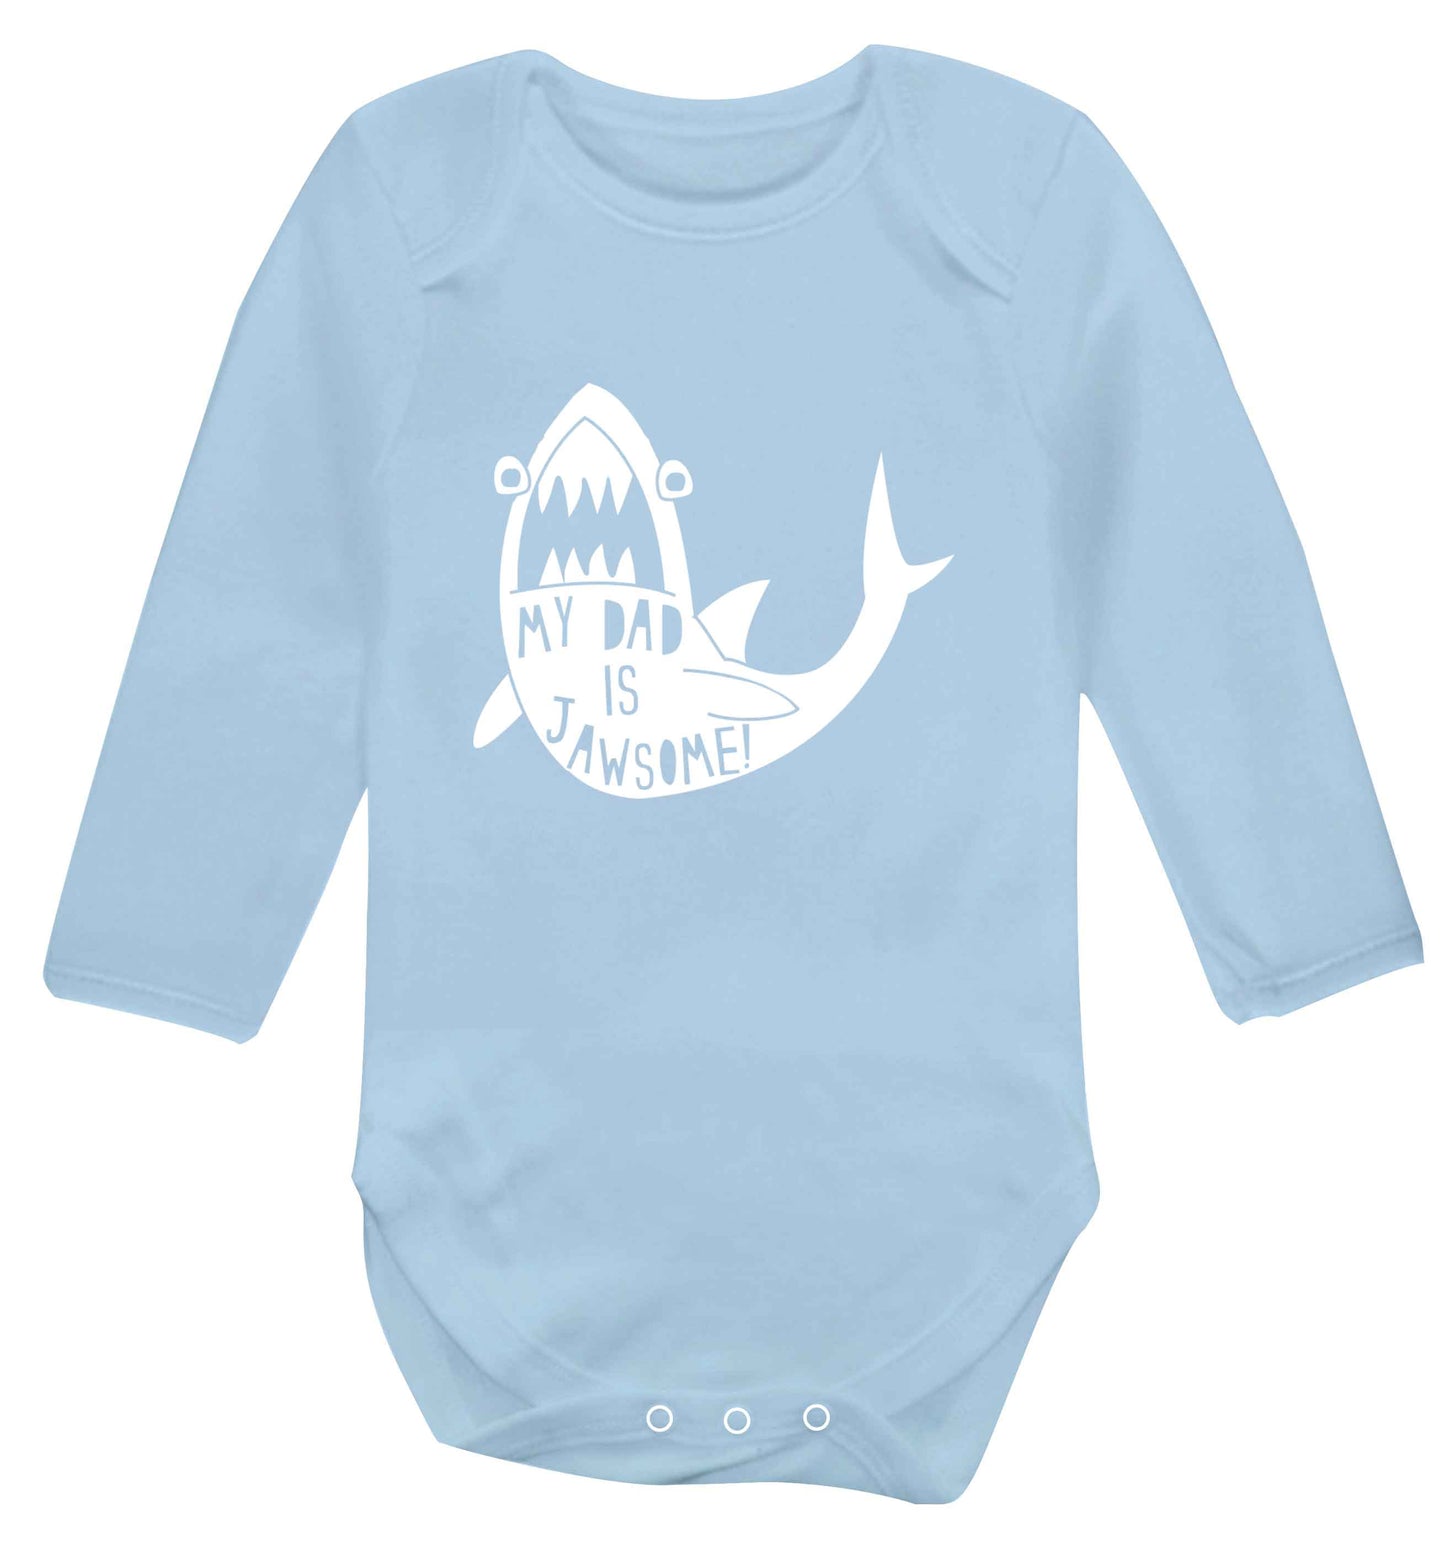 My Dad is jawsome baby vest long sleeved pale blue 6-12 months